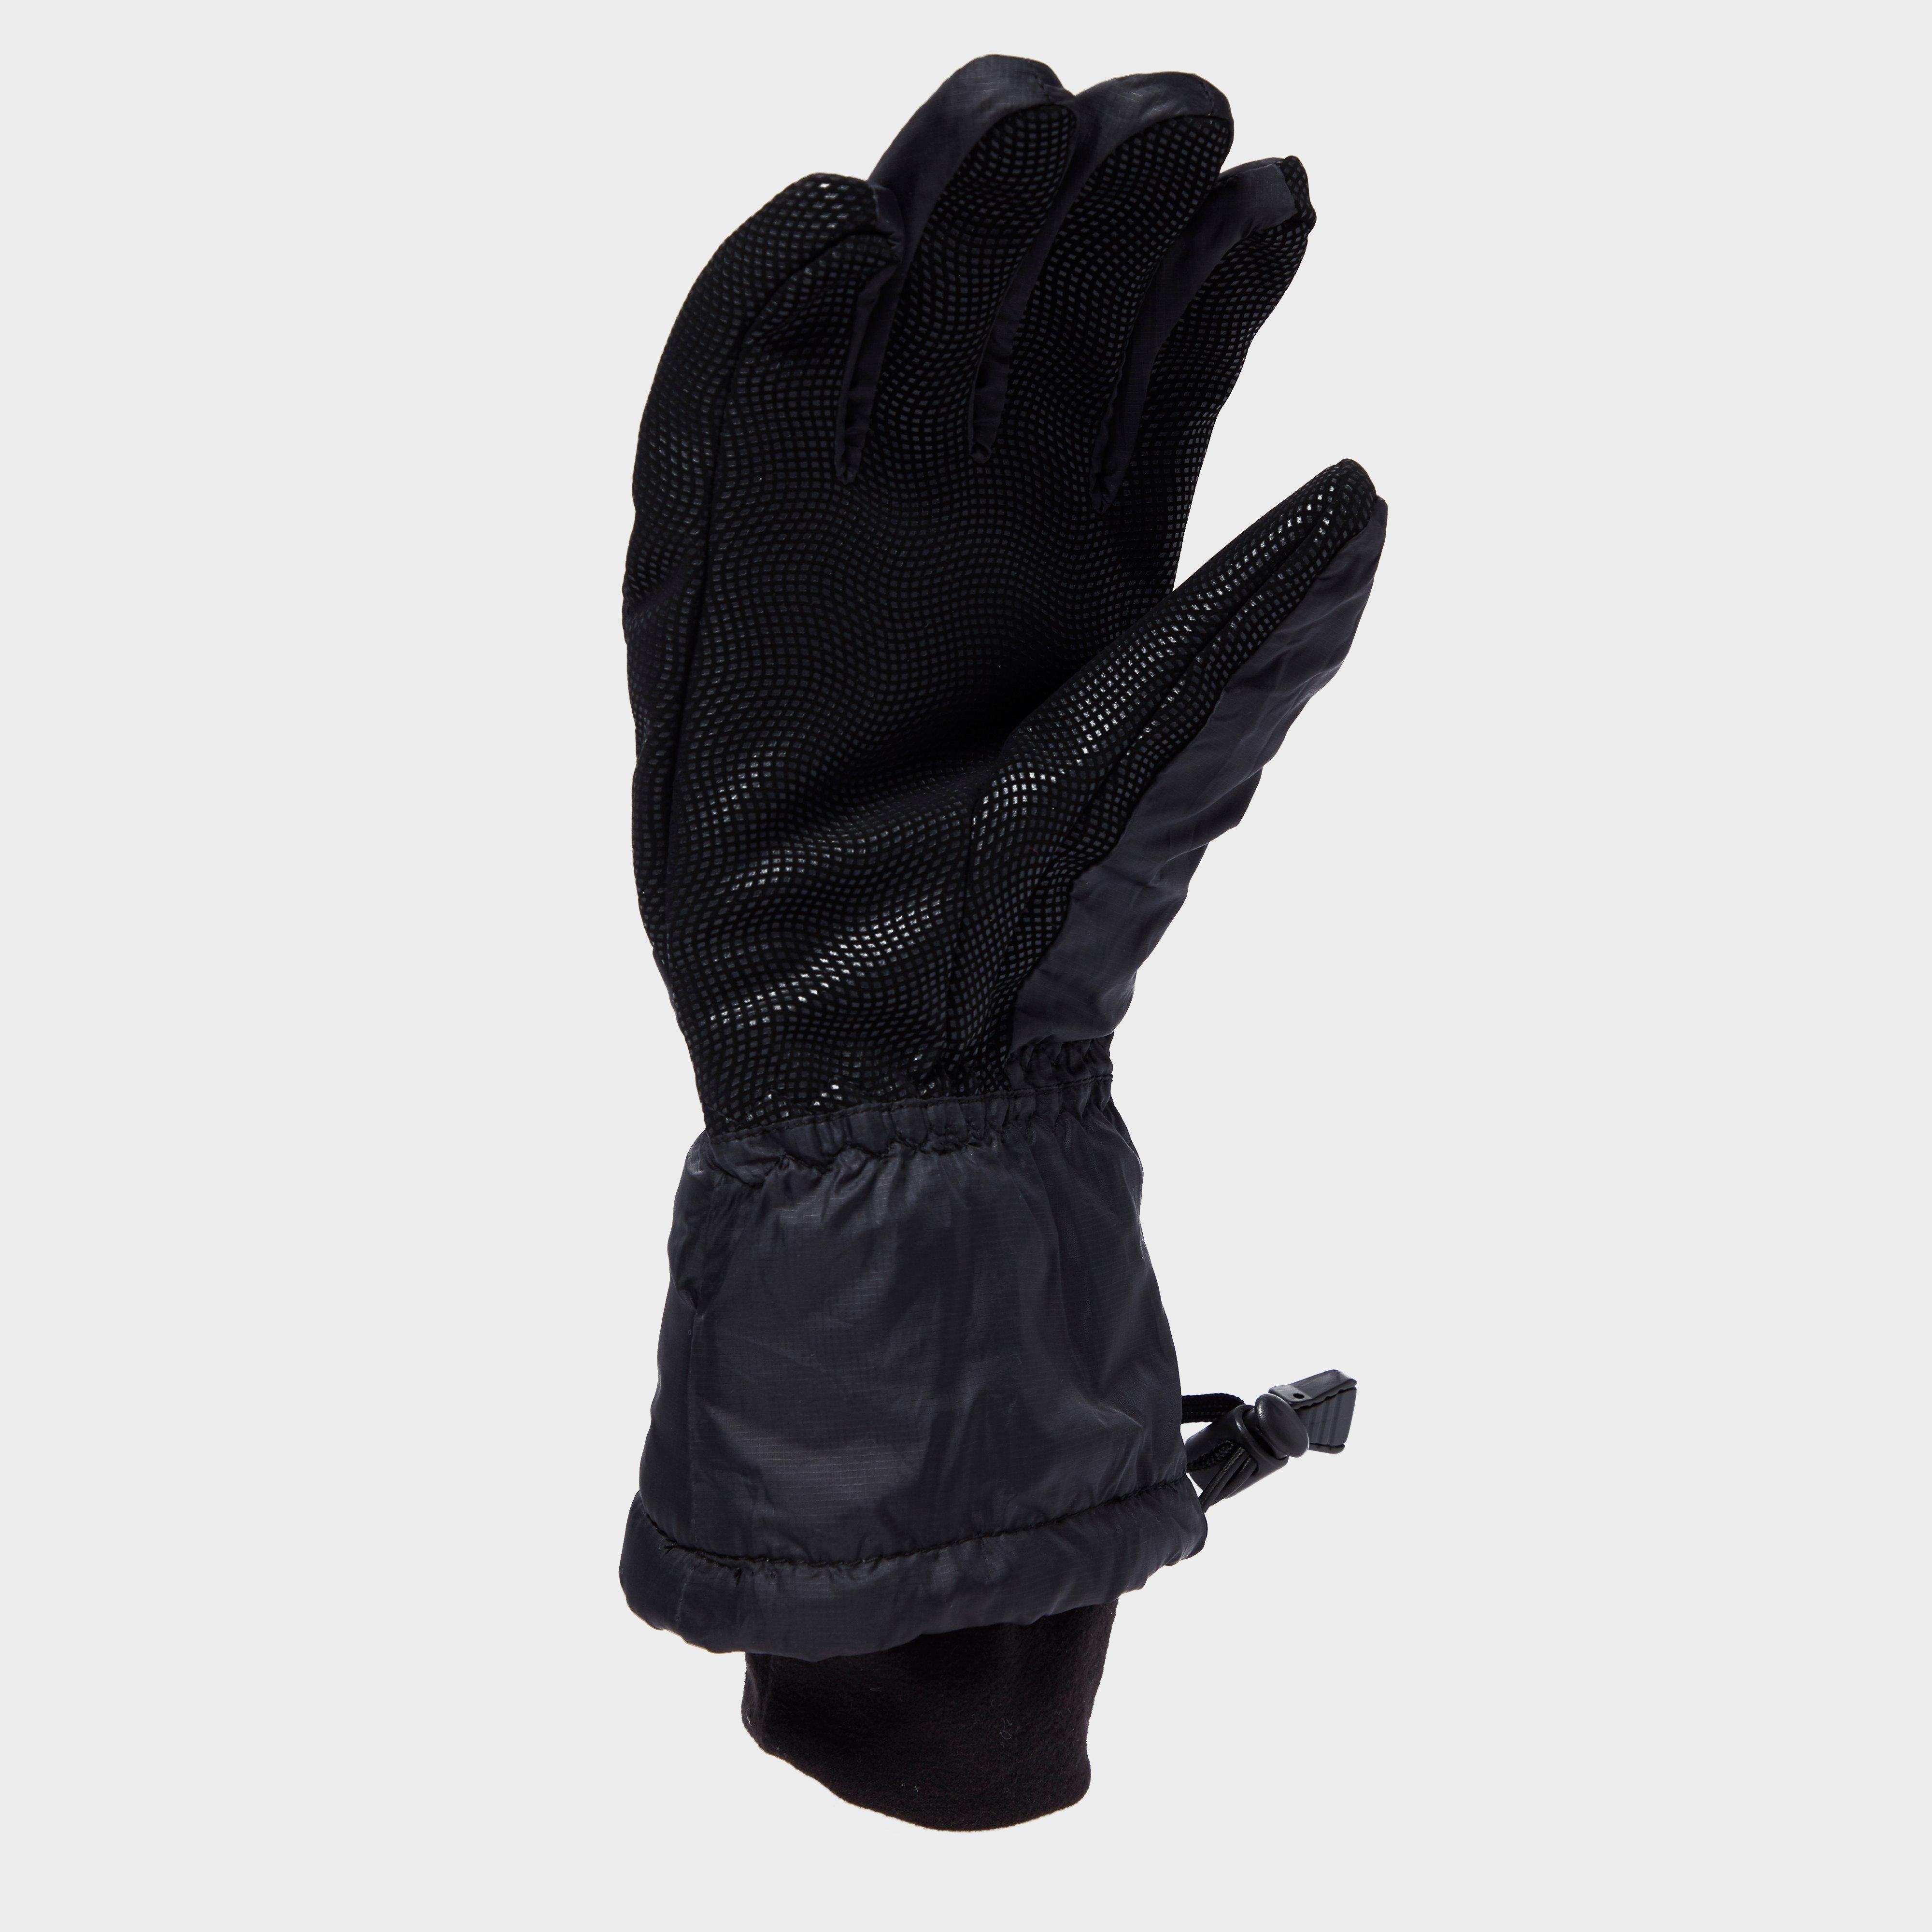 Sealskinz Waterproof Extreme Cold Weather Down Glove Review